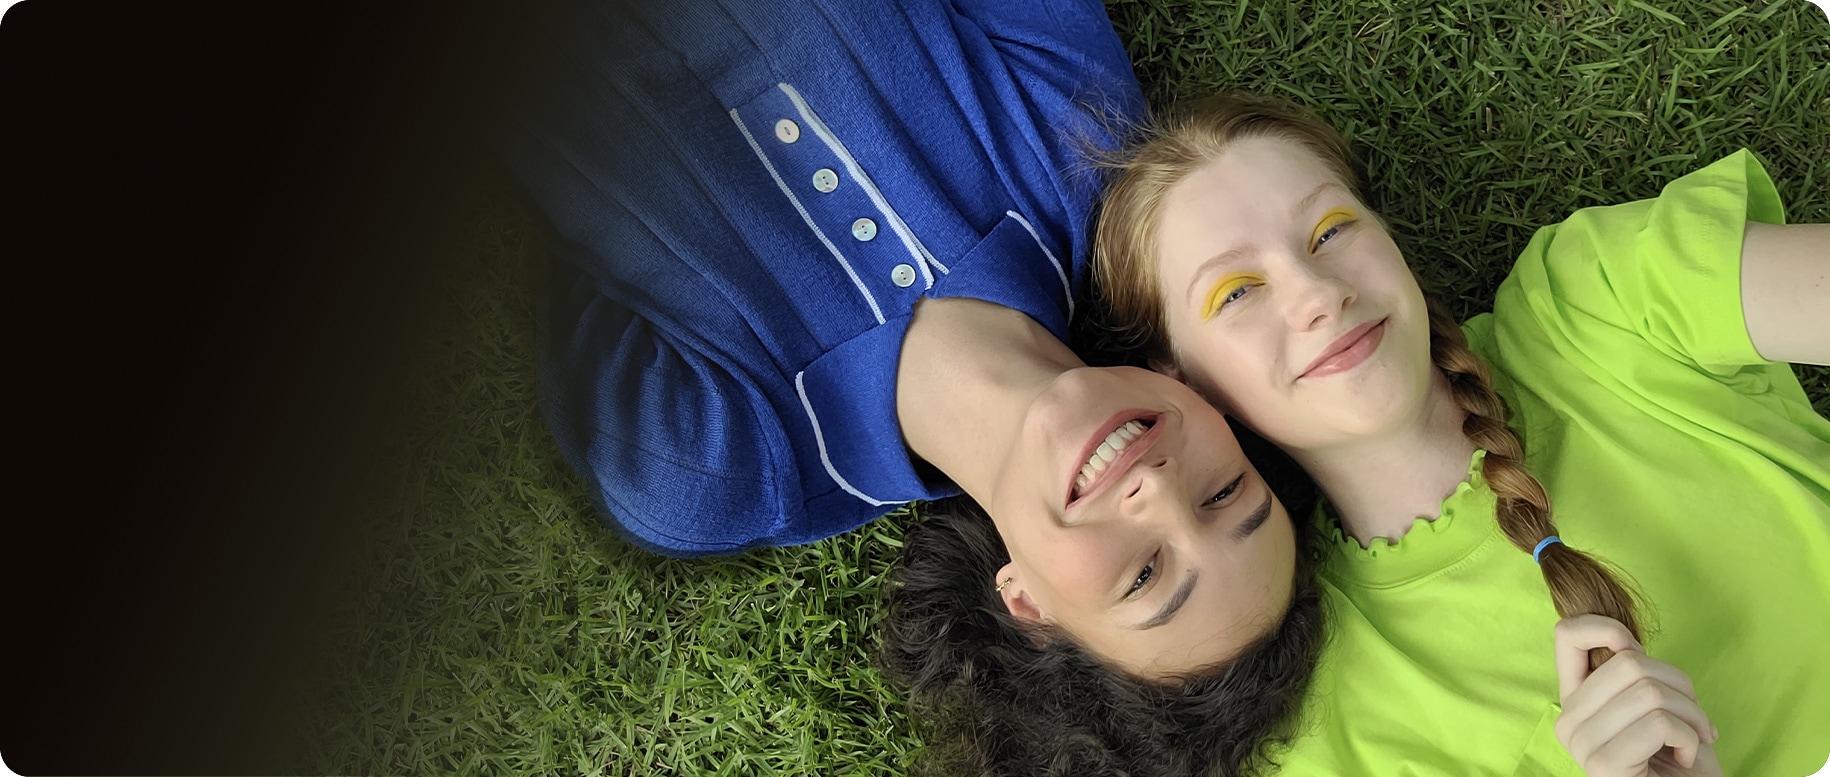 An aerial view of two women laying side-by-side on the grass. The woman on the left is wearing a blue collared shirt while the woman on the right is wearing a lime green top. Their heads are pressed together from opposite ends. They're both smiling at the camera.